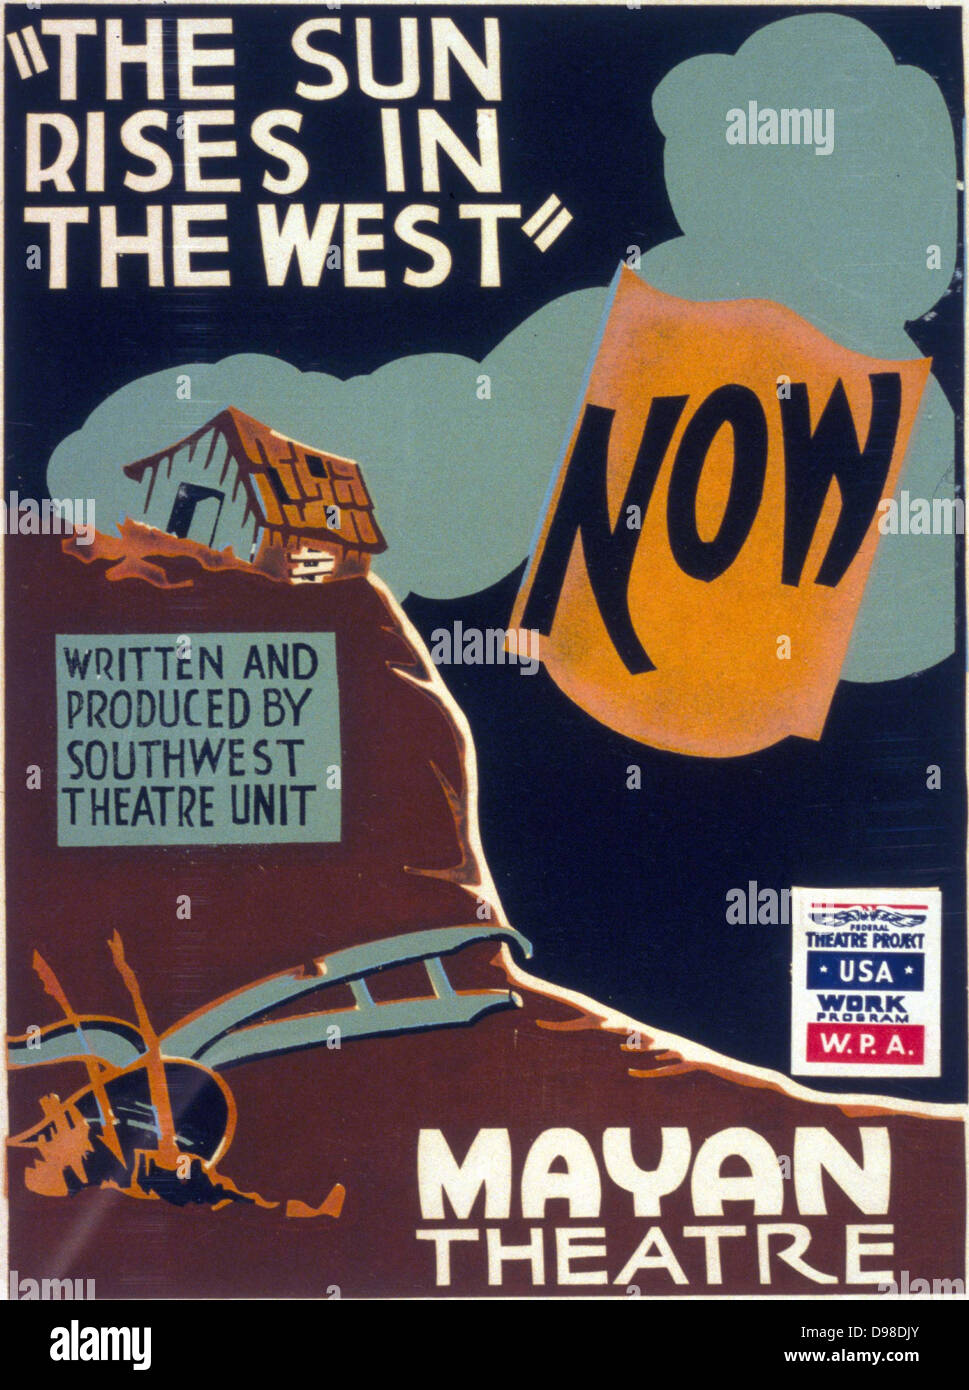 Poster for 'The Sun Rises in the West' produced at the Mayan Theatre, California under the auspices of the Californian Art Project, part of the Work Projects Administration, WPA, founded by FD Roosevelt in 1935 to provide jobs during the Great Depression. Stock Photo